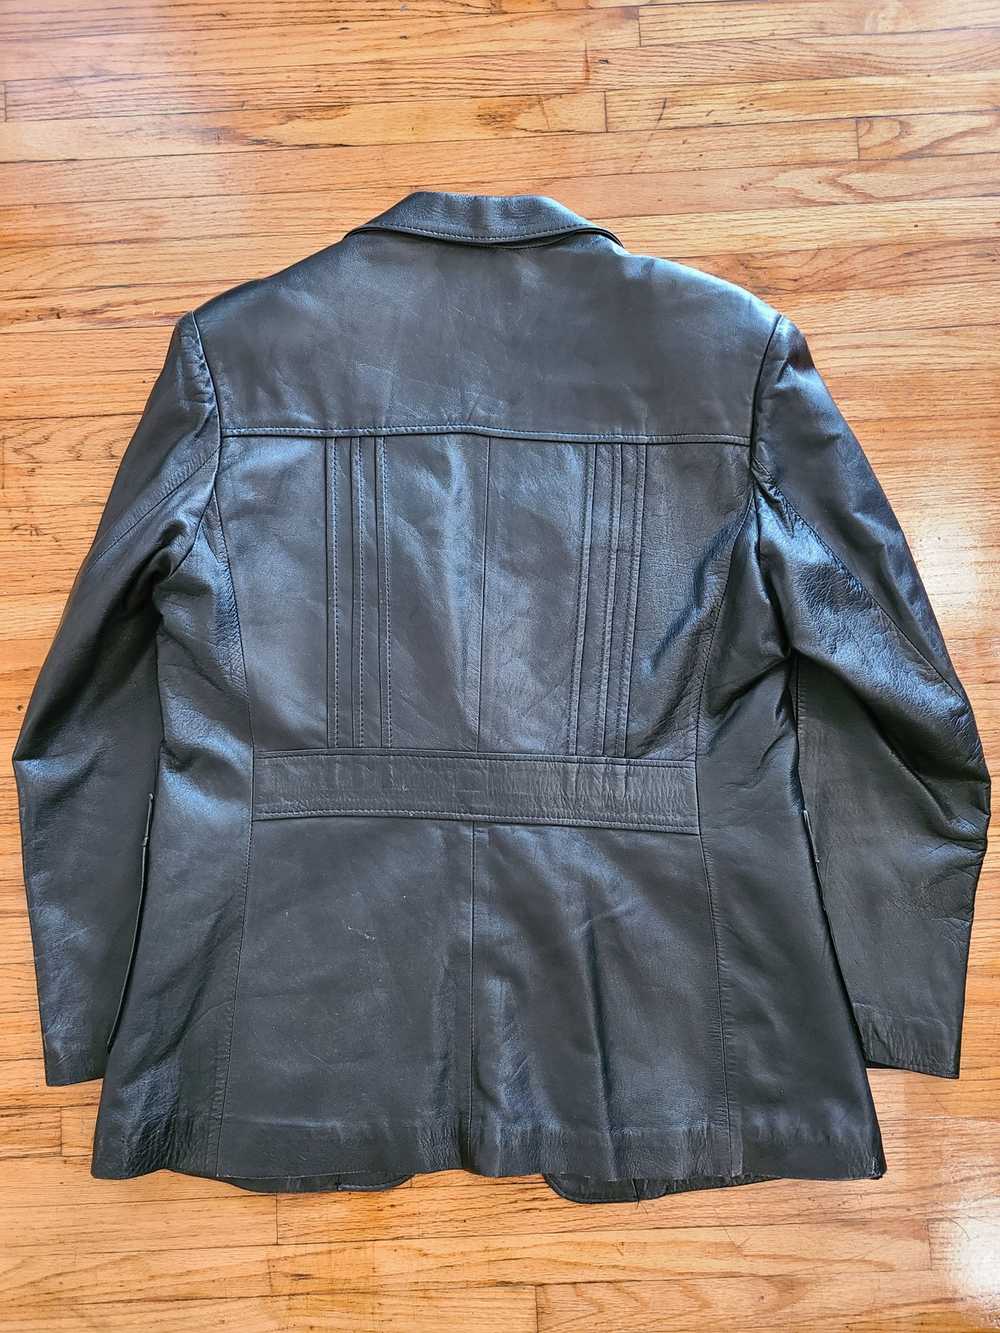 Made In Usa Vintage Leather Jacket - image 2